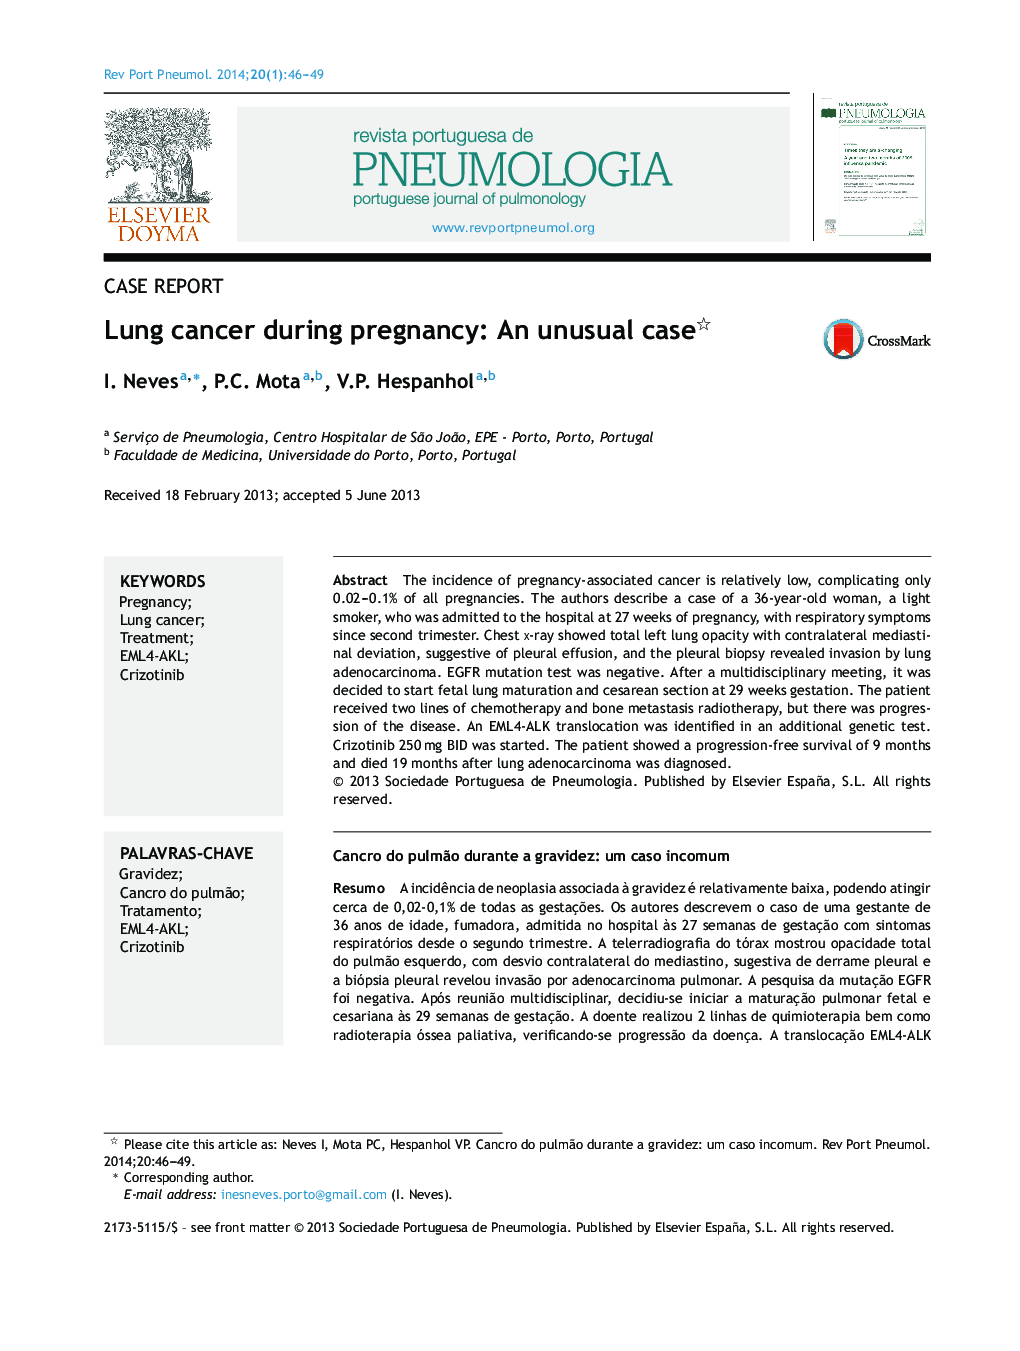 Lung cancer during pregnancy: An unusual case